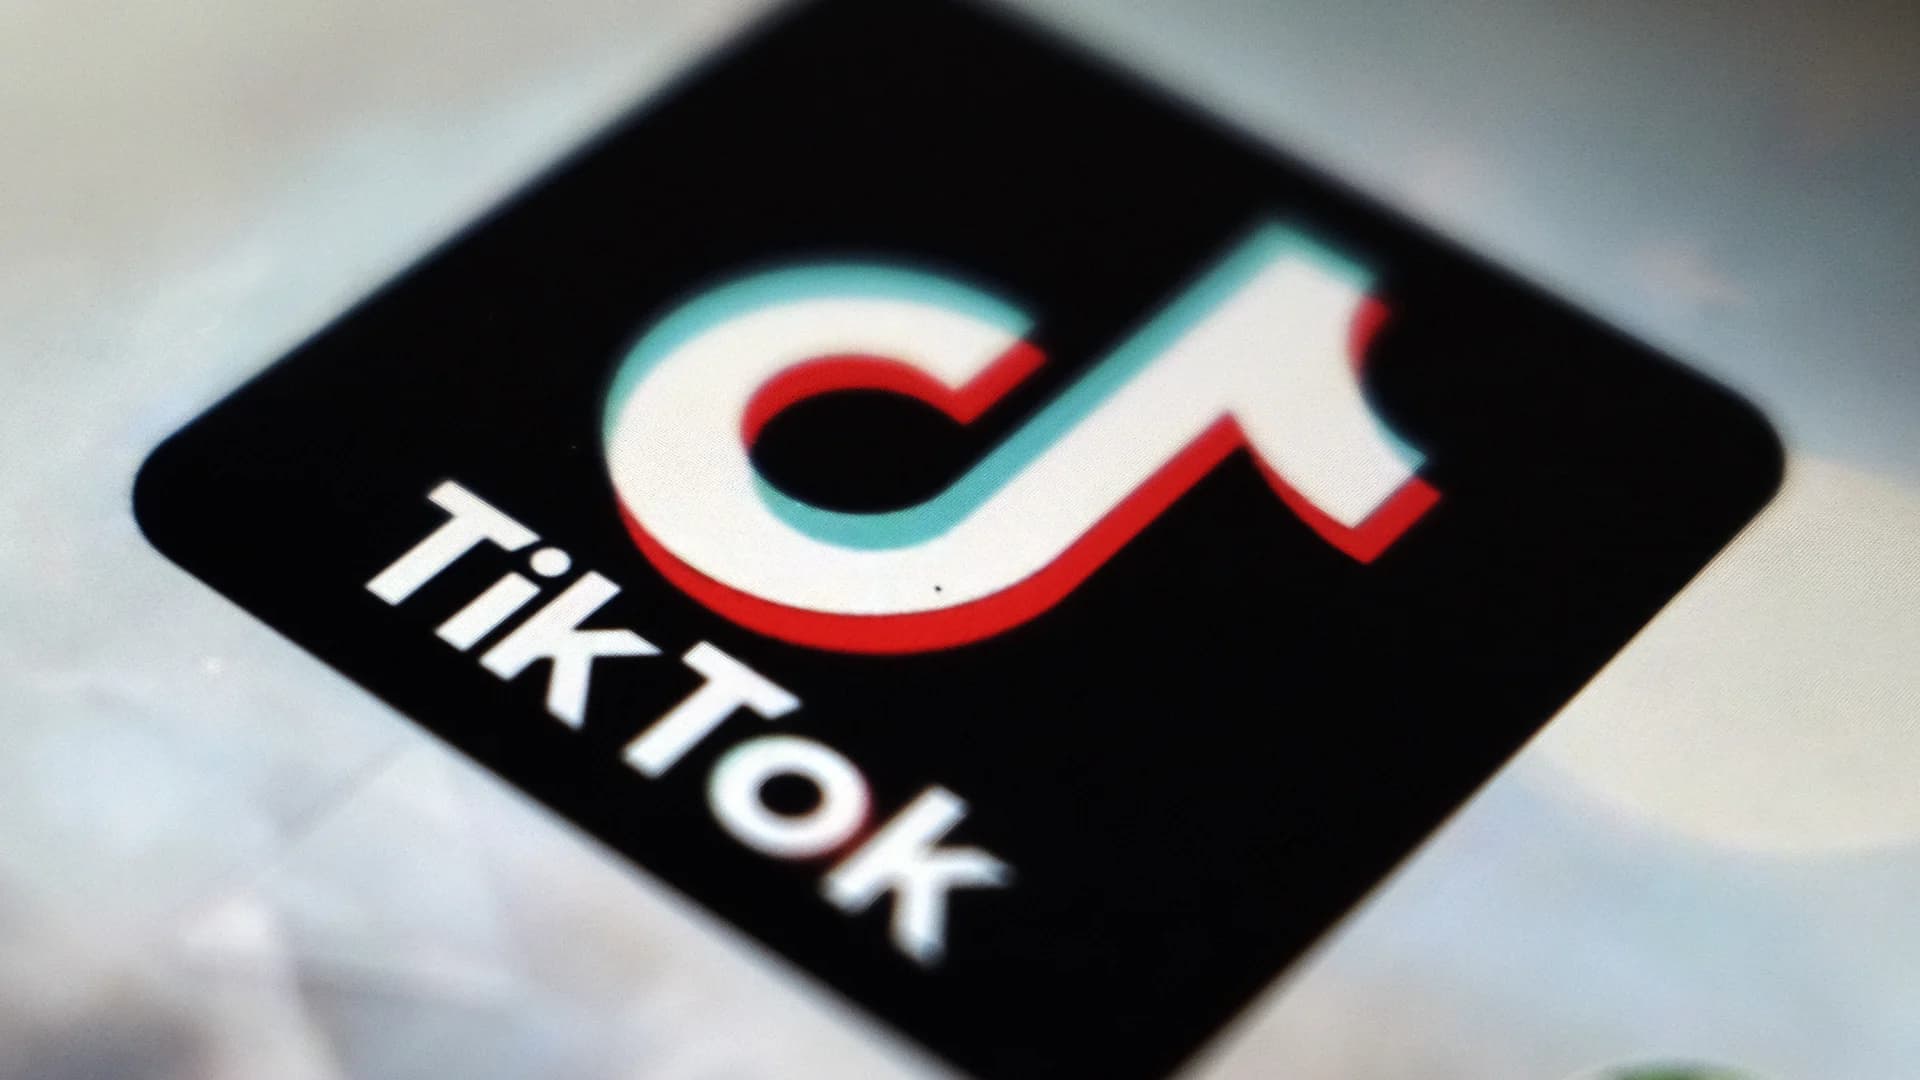 NJ to co-lead multistate investigation to determine if TikTok is harmful to minors